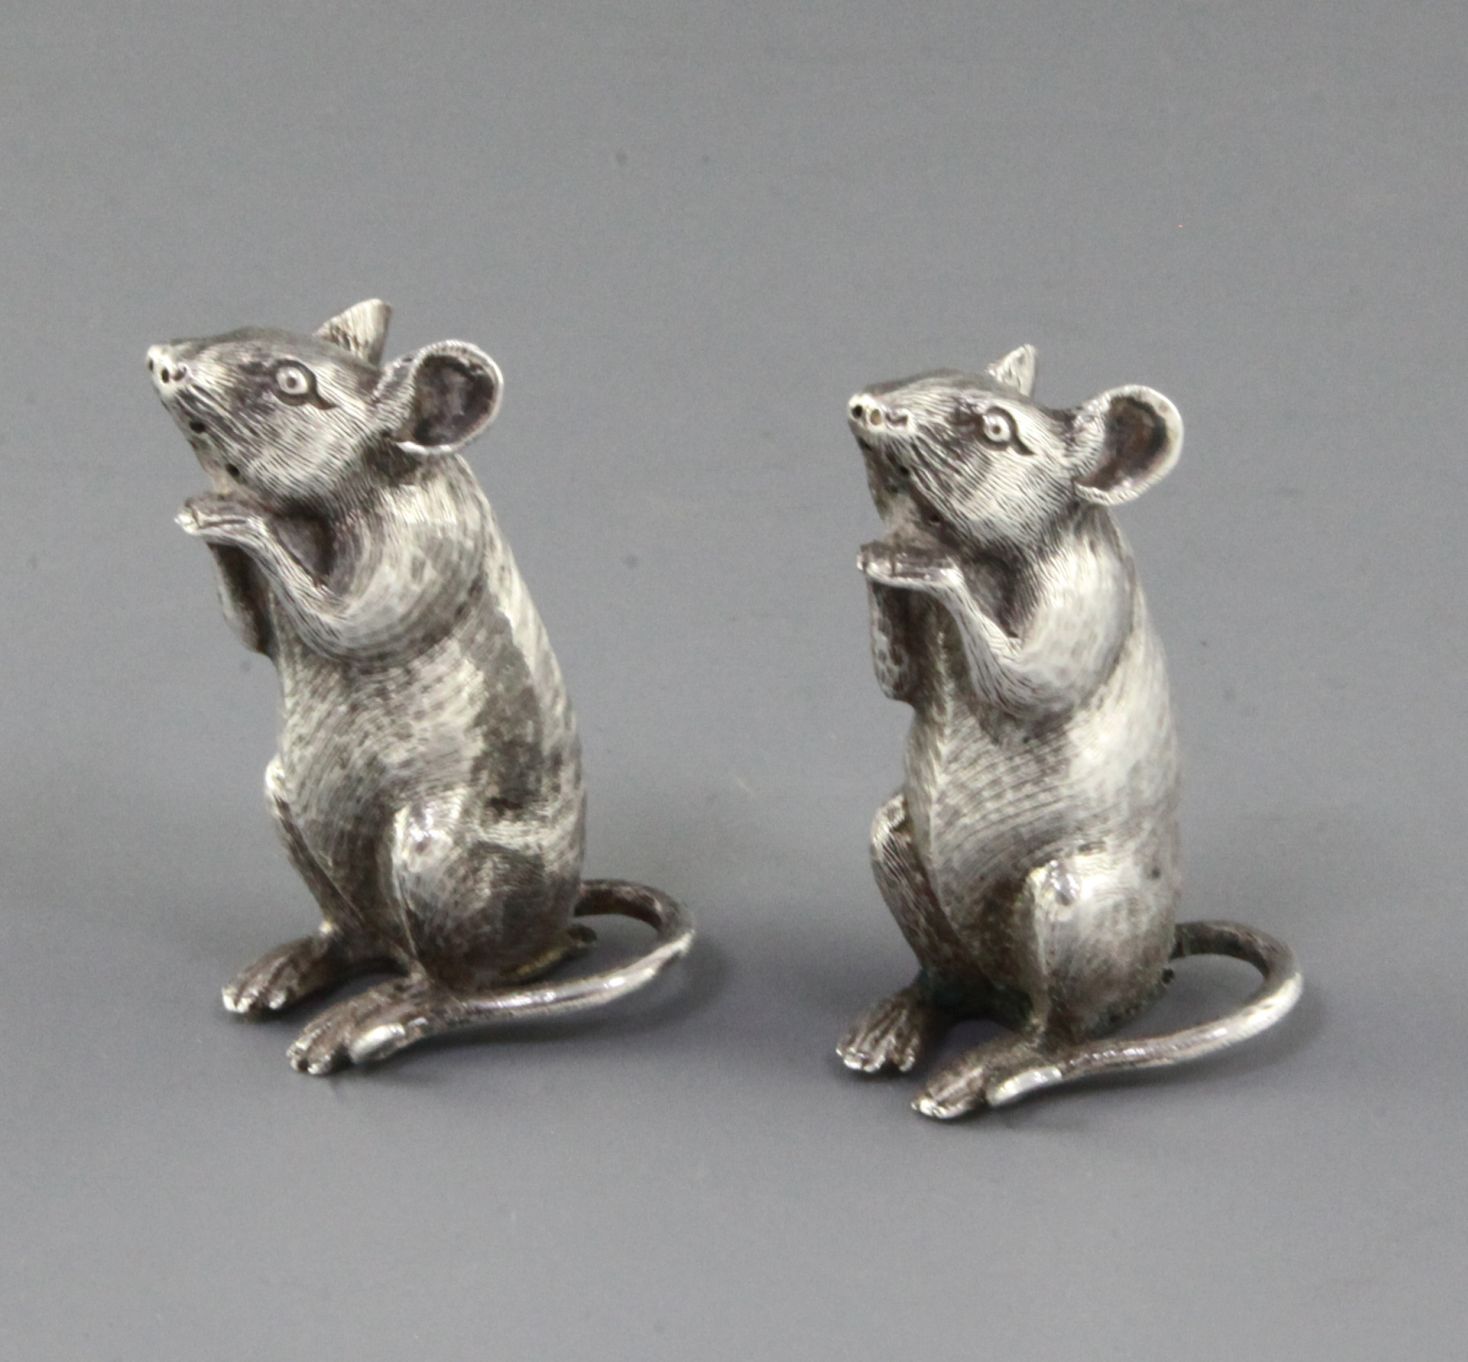 A pair of late Victorian novelty silver pepperettes by Saunders & Shepherd, each modelled as a